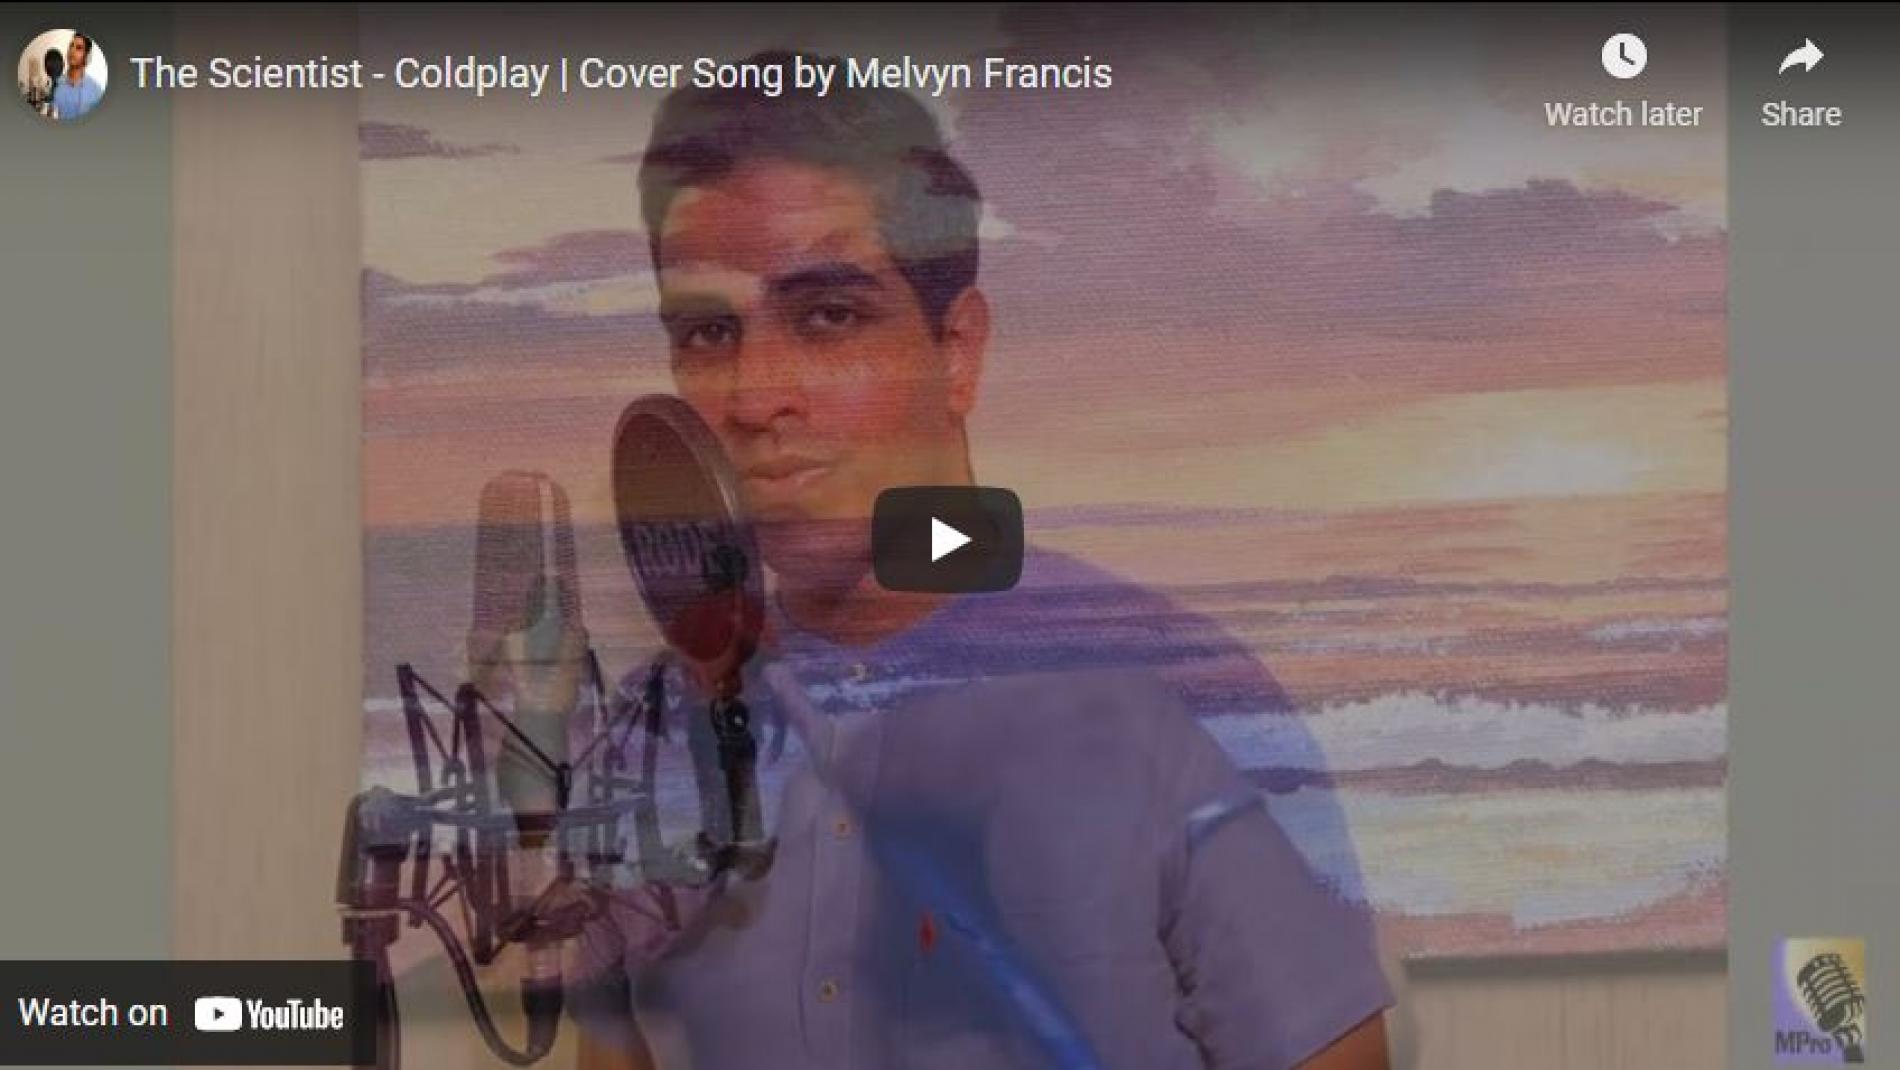 New Music : The Scientist – Coldplay | Cover Song by Melvyn Francis